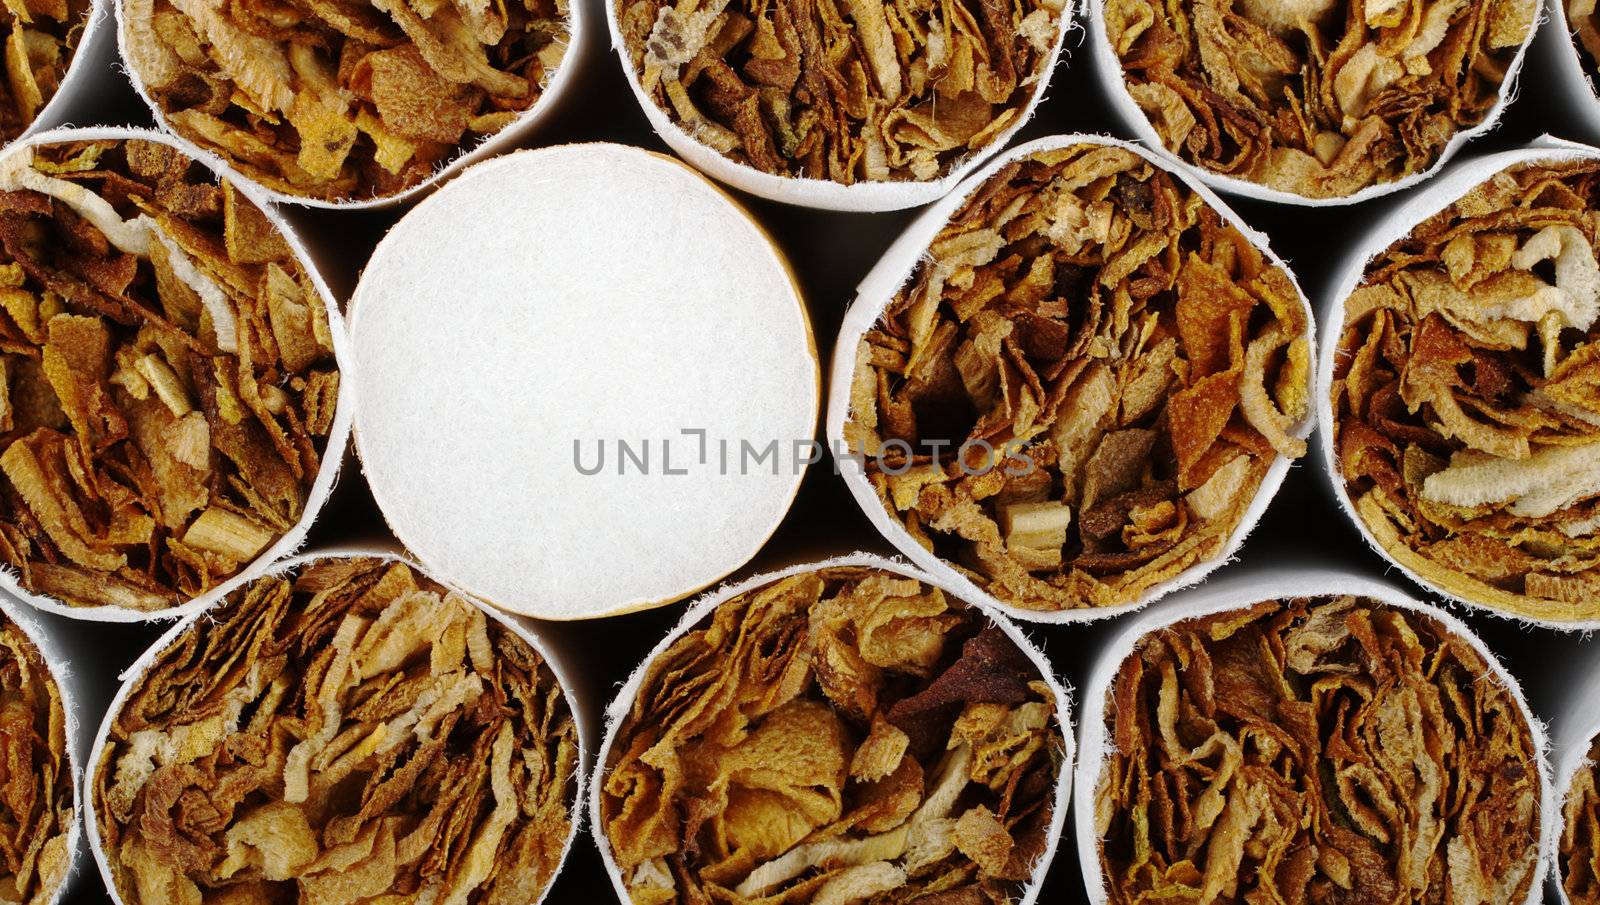 Cigarette with filter in between ones without filter as background